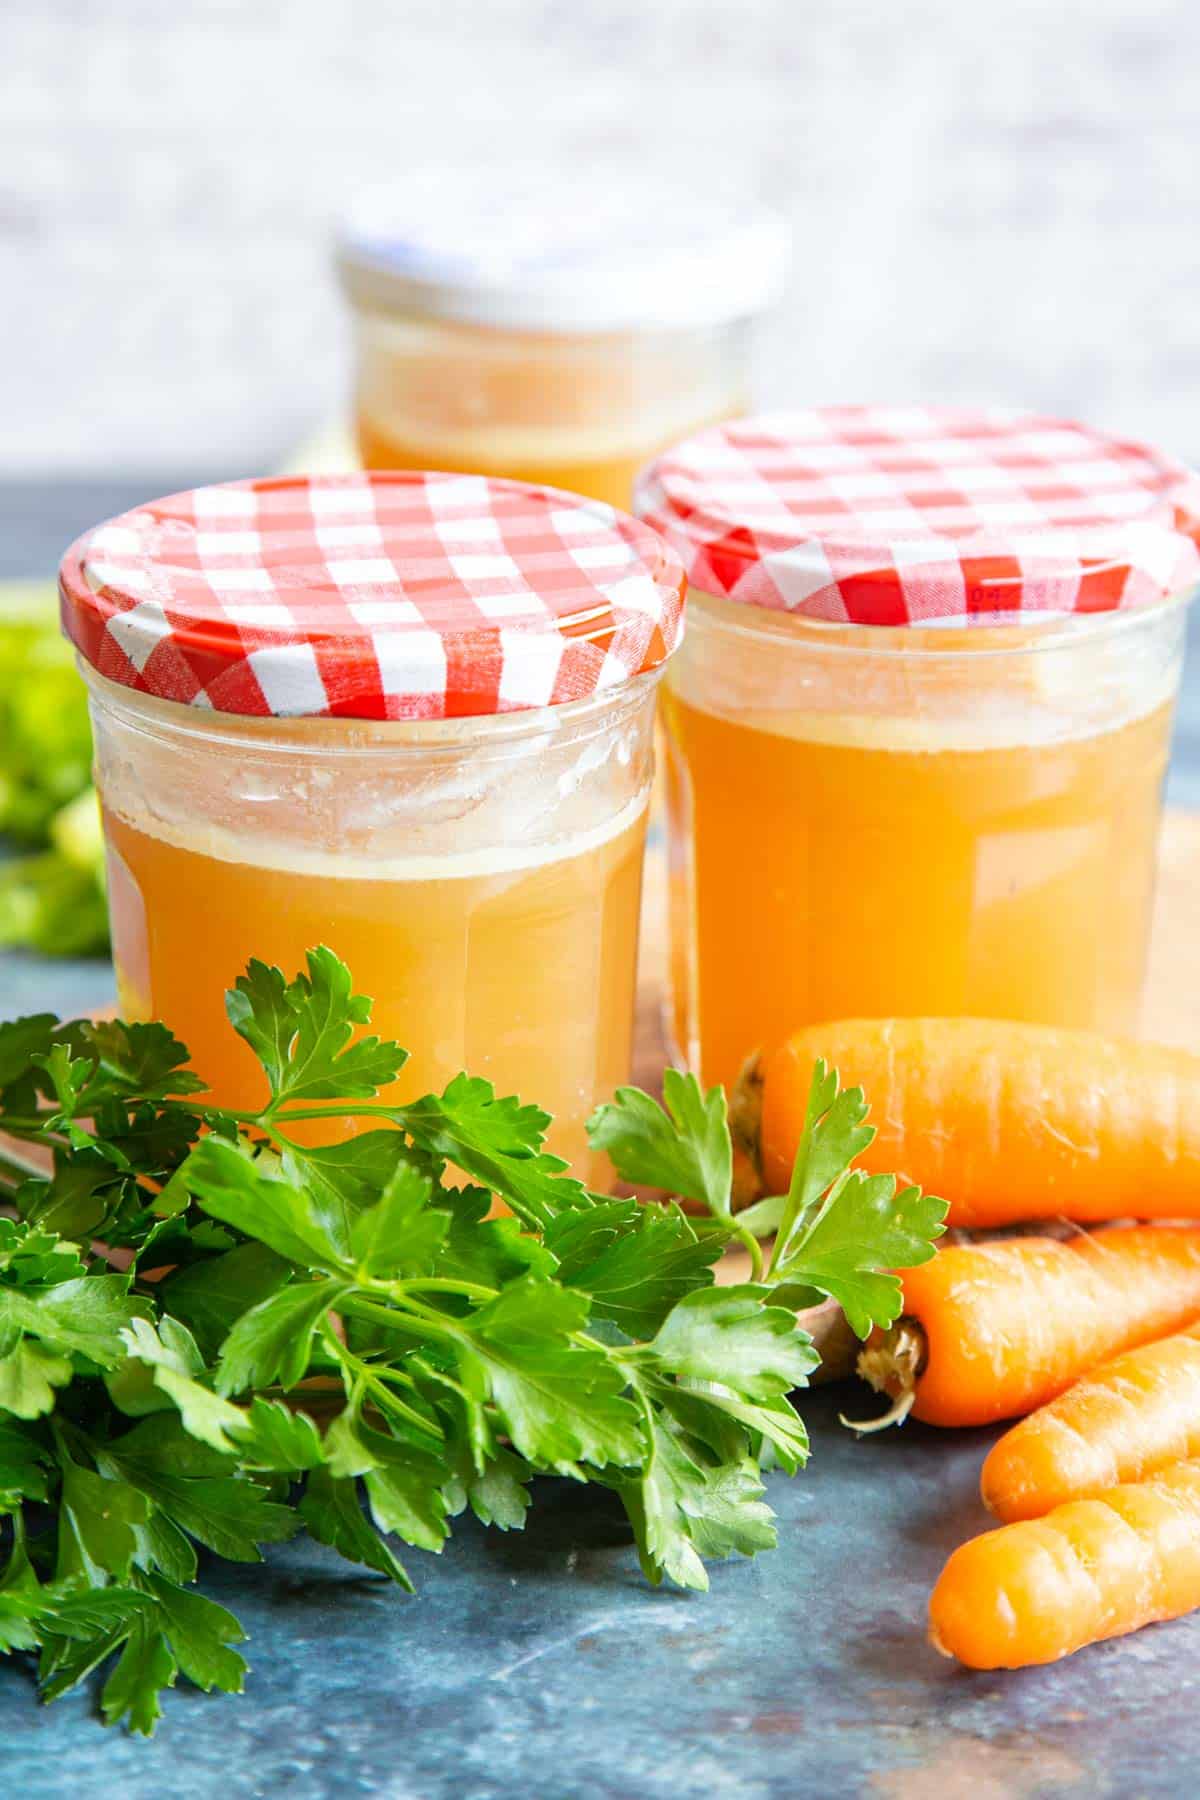 Jars of classic chicken stock surrounded by fresh parsley and carrots.